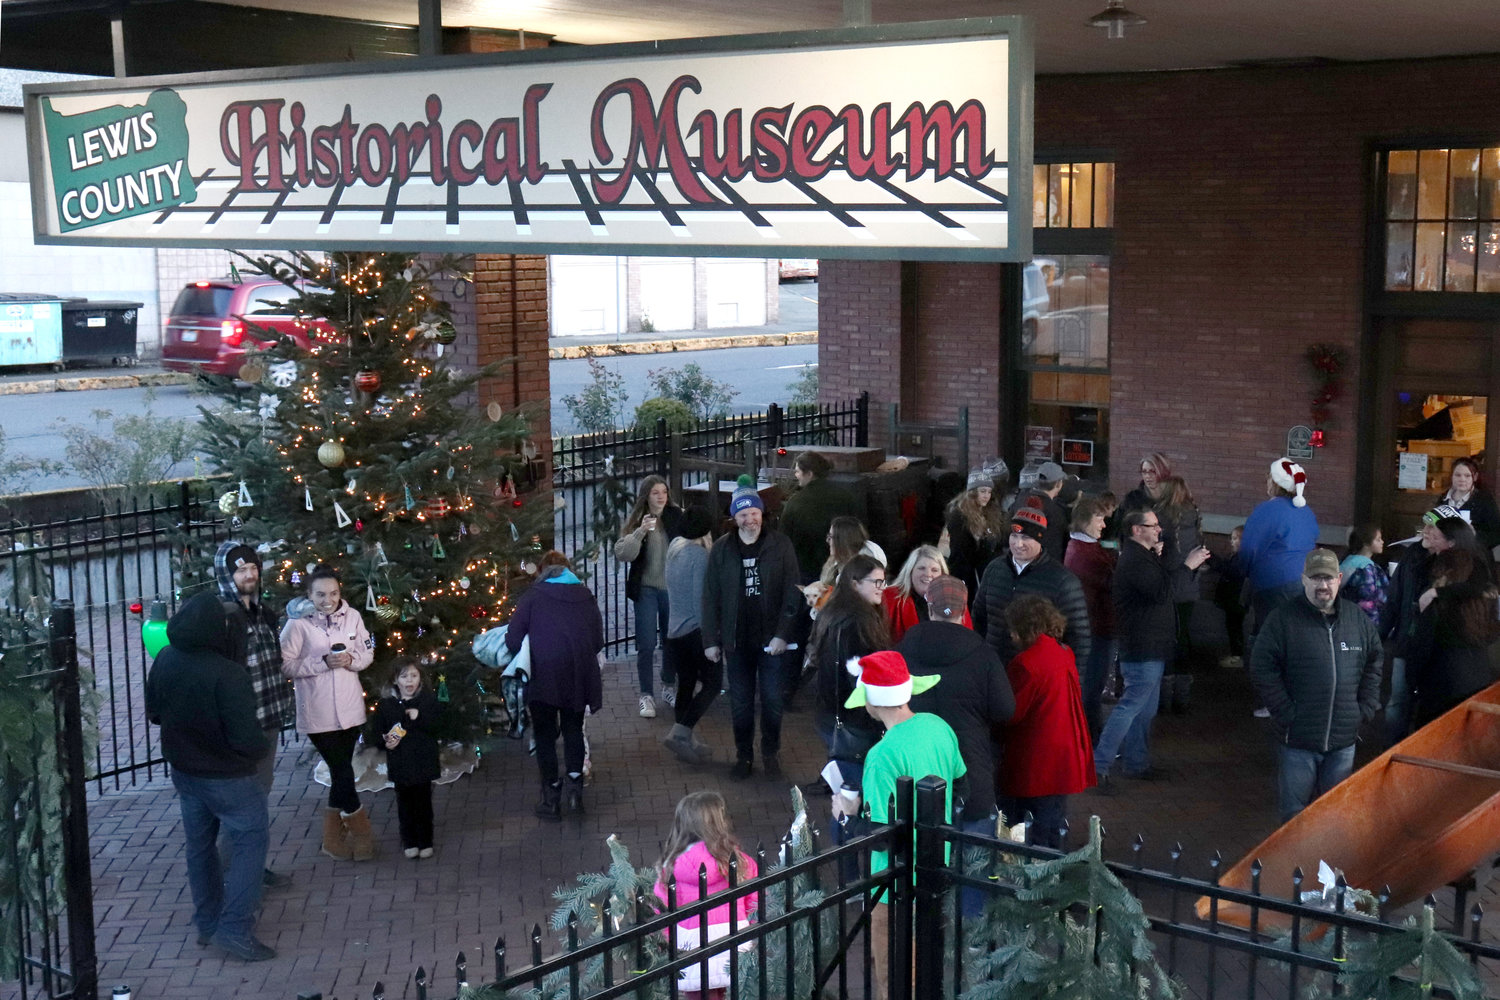 People sing carols around the City of Chehalis’ Christmas tree outside of the Lewis County Historical Museum on Saturday.